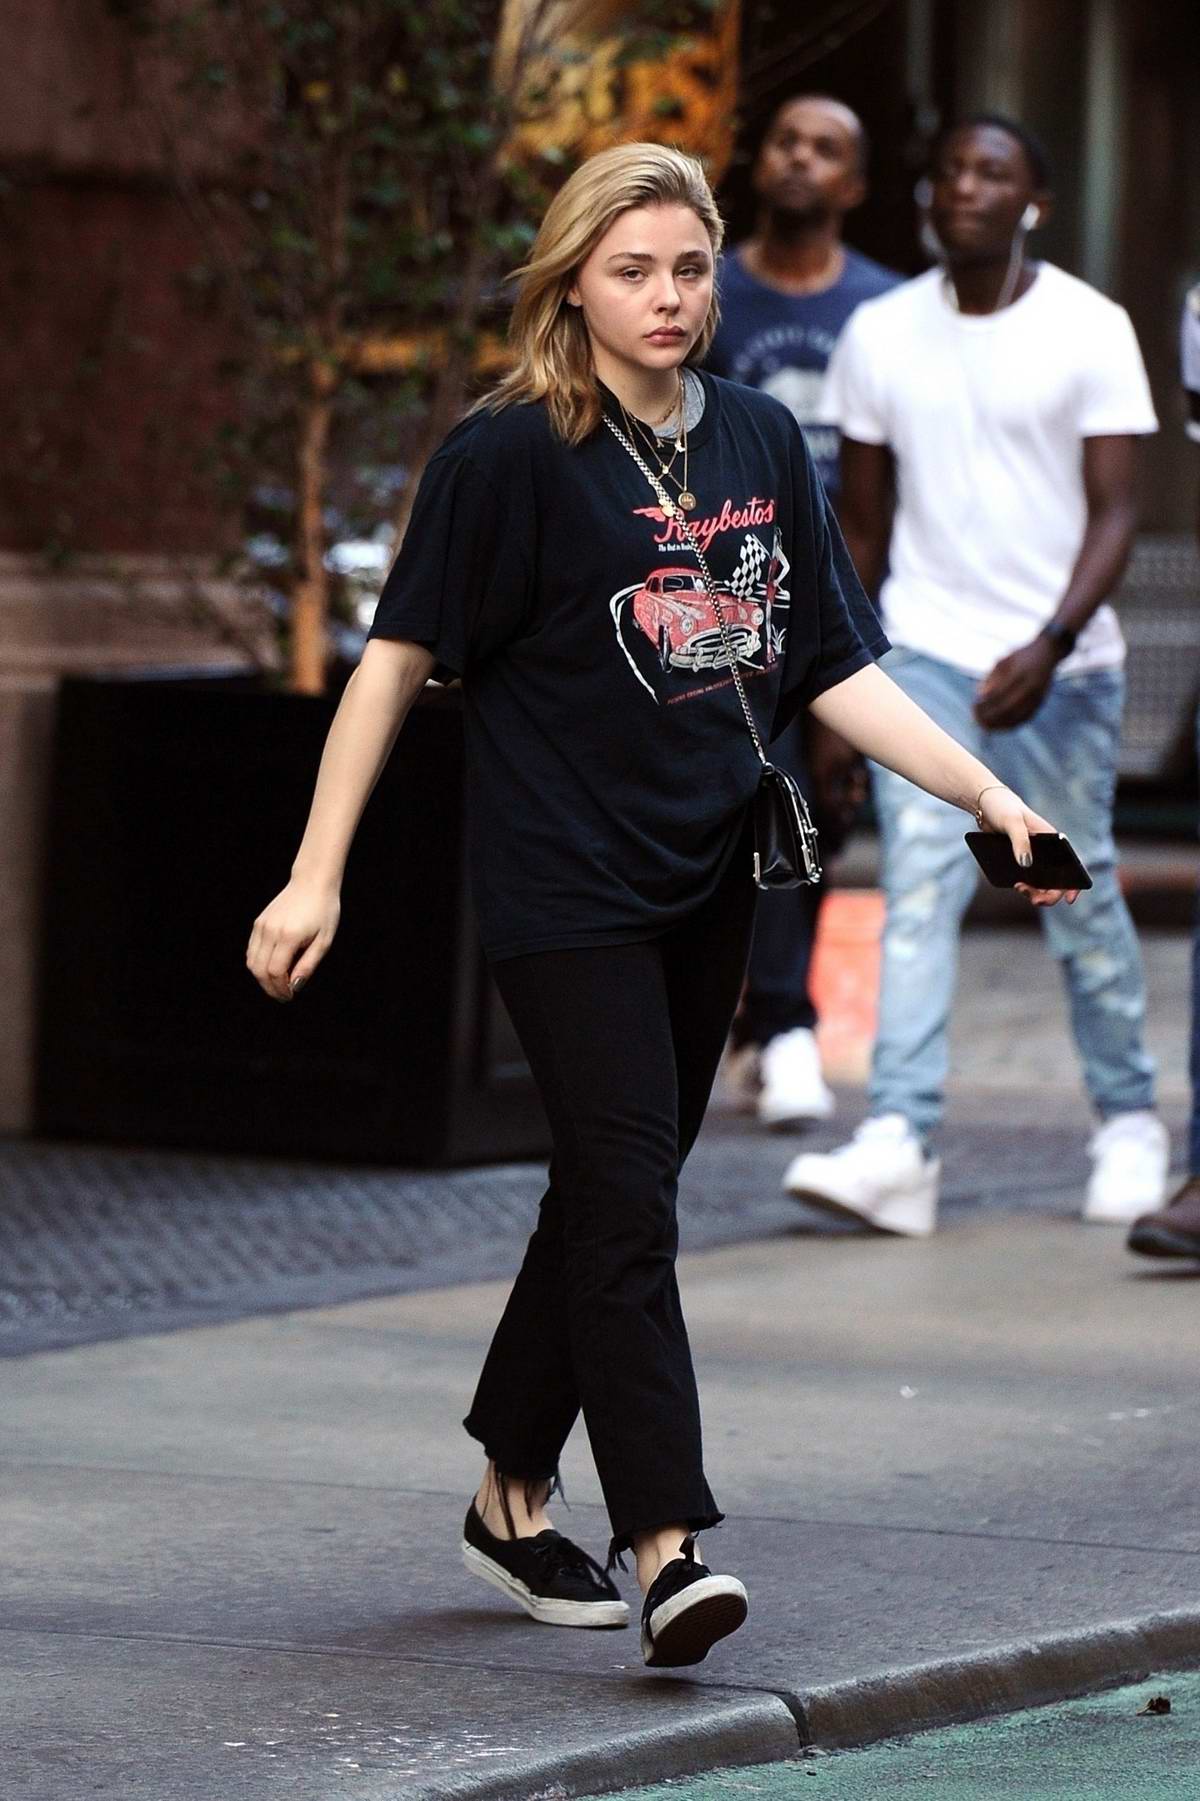 Chloe Grace Moretz opts for a casual look while out in SoHo, New York City